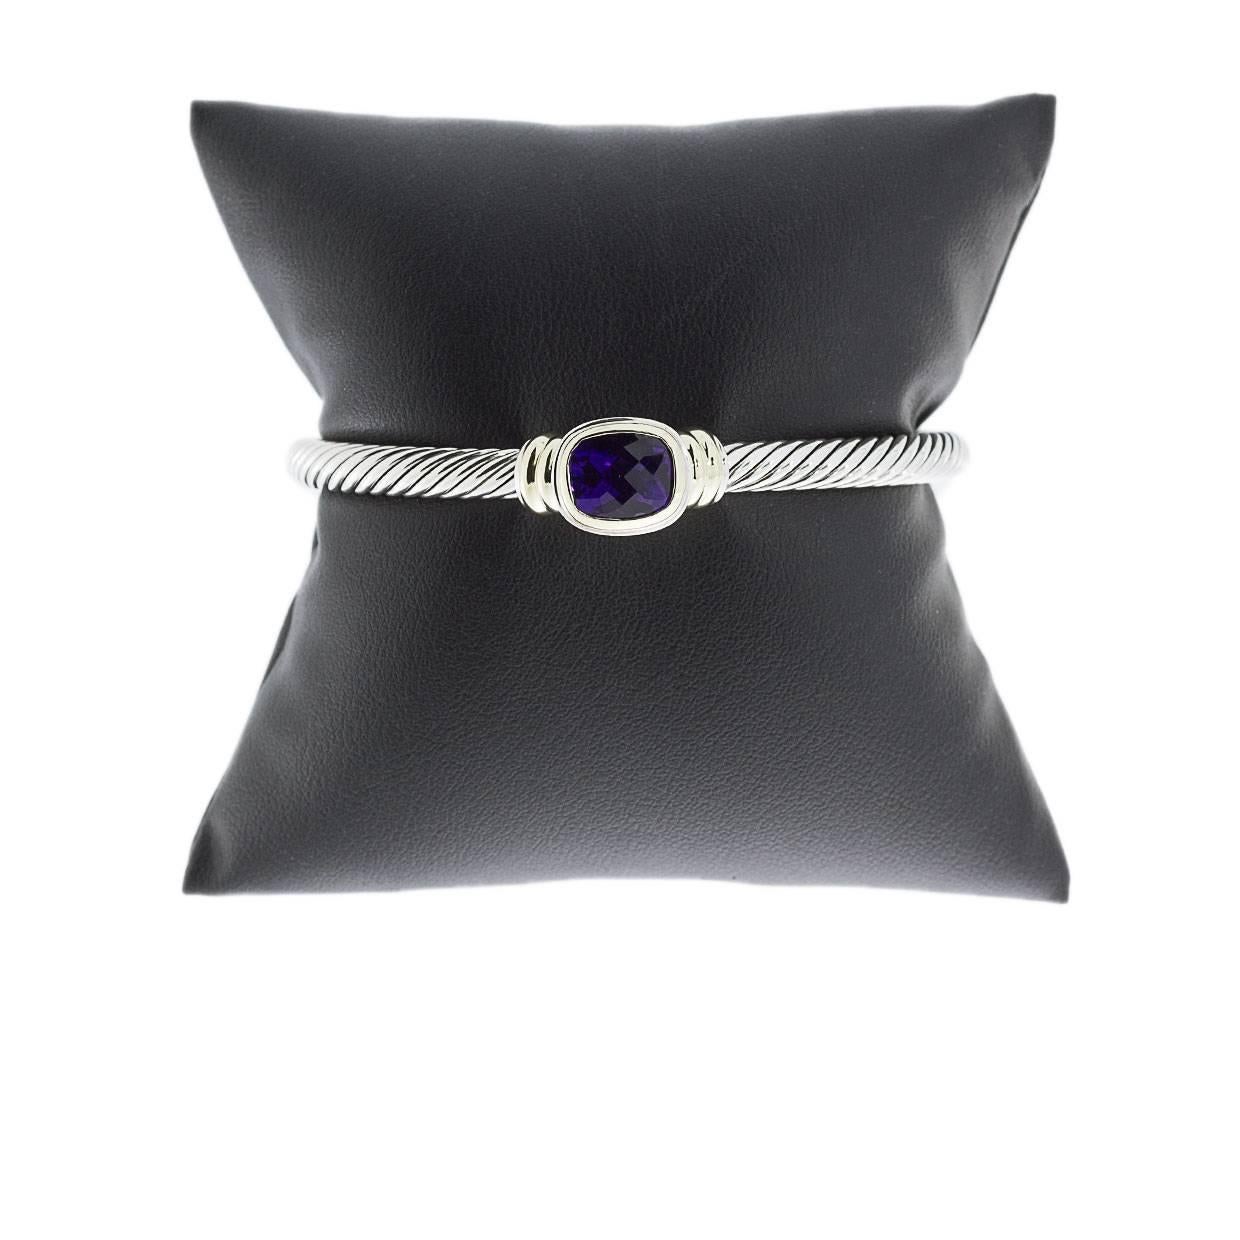 Brand: David Yurman
Collection: Cable Classics
Main Stone: Amethyst
Main Stone Shape: Cushion
Metal: Sterling Silver
Style: Cuff
Width: 5.00 mm
Fastening: None (Open Cuff)
Colored Stone Color: Purple
Metal Purity: 925 Parts Per 1000
Estimated Retail